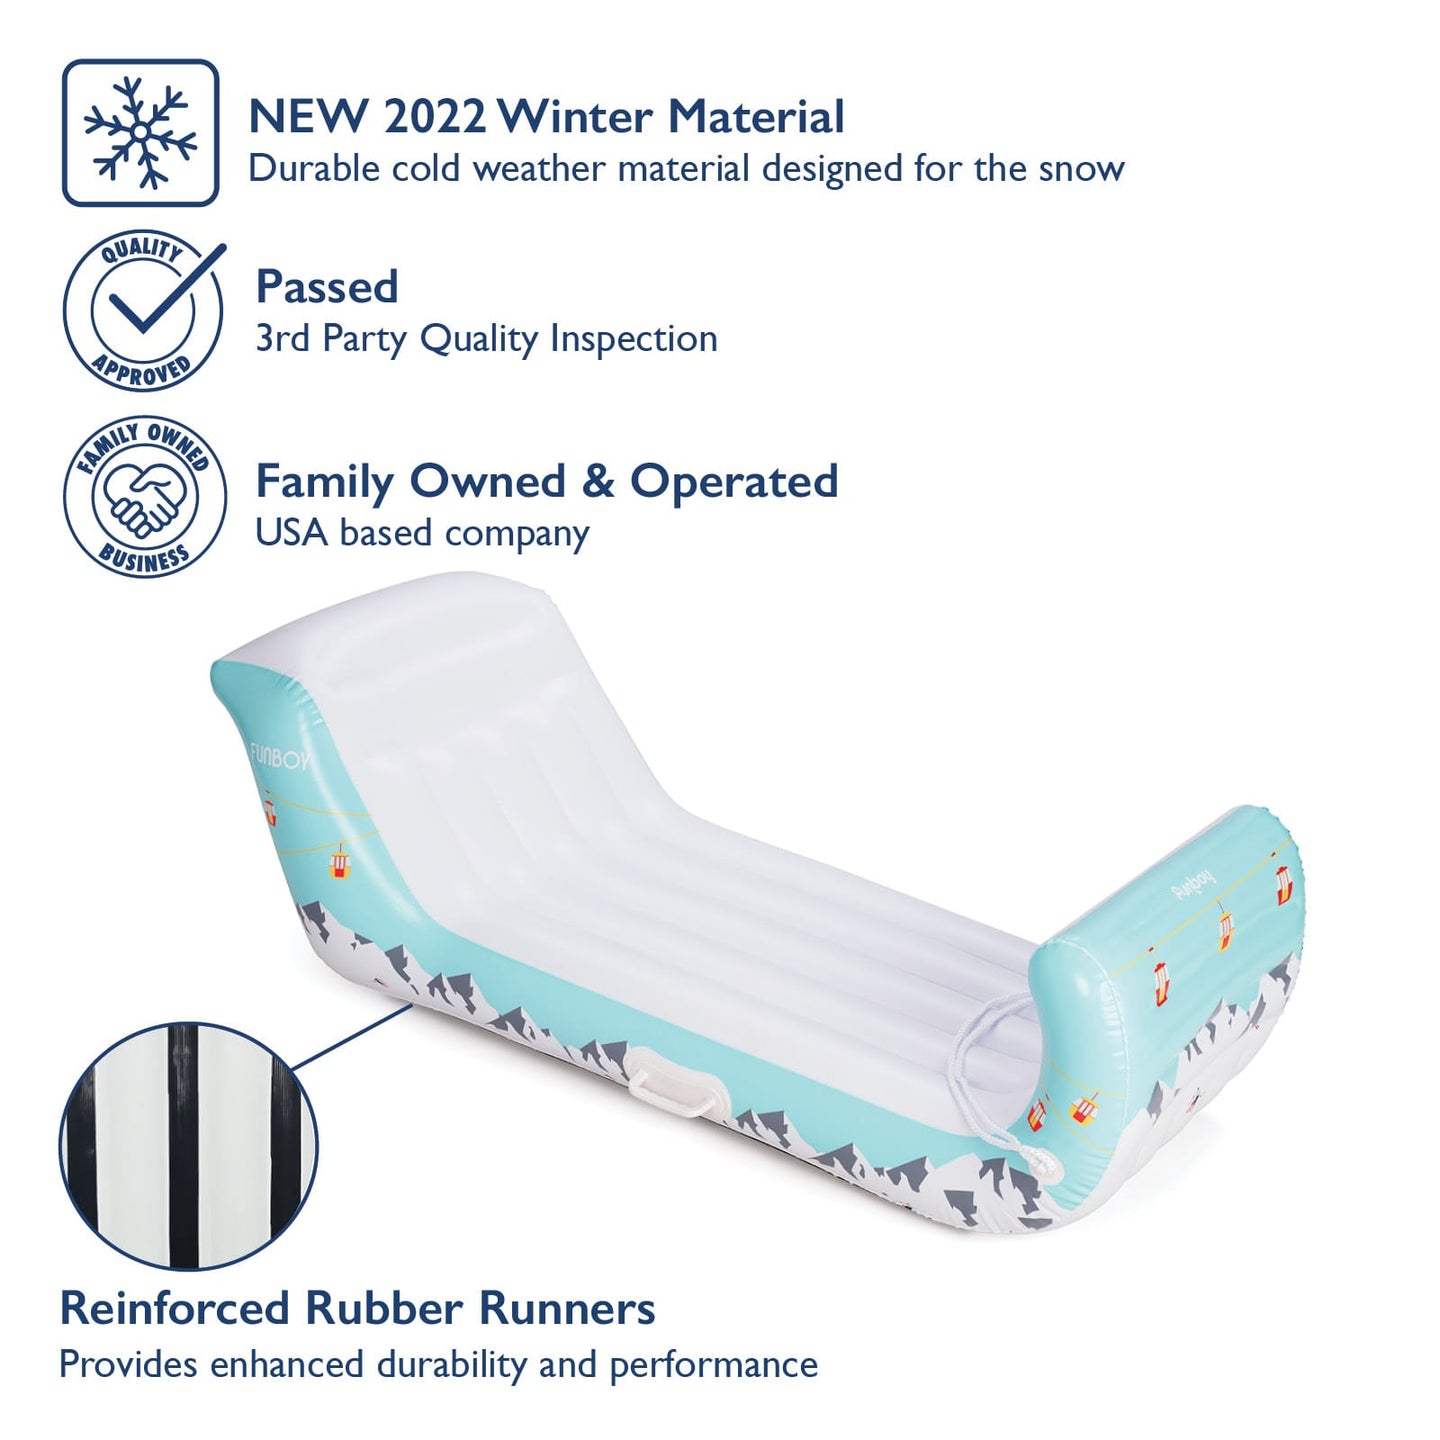 FUNBOY Winter Sled. New 2022 Winter Material. Durable cold weather material designed for snow. Passed 3rd Party Quality Inspection. Family Owned and Operated. USA Based. Reinforced Rubber Runners.  Provides enhanced durability and performance.